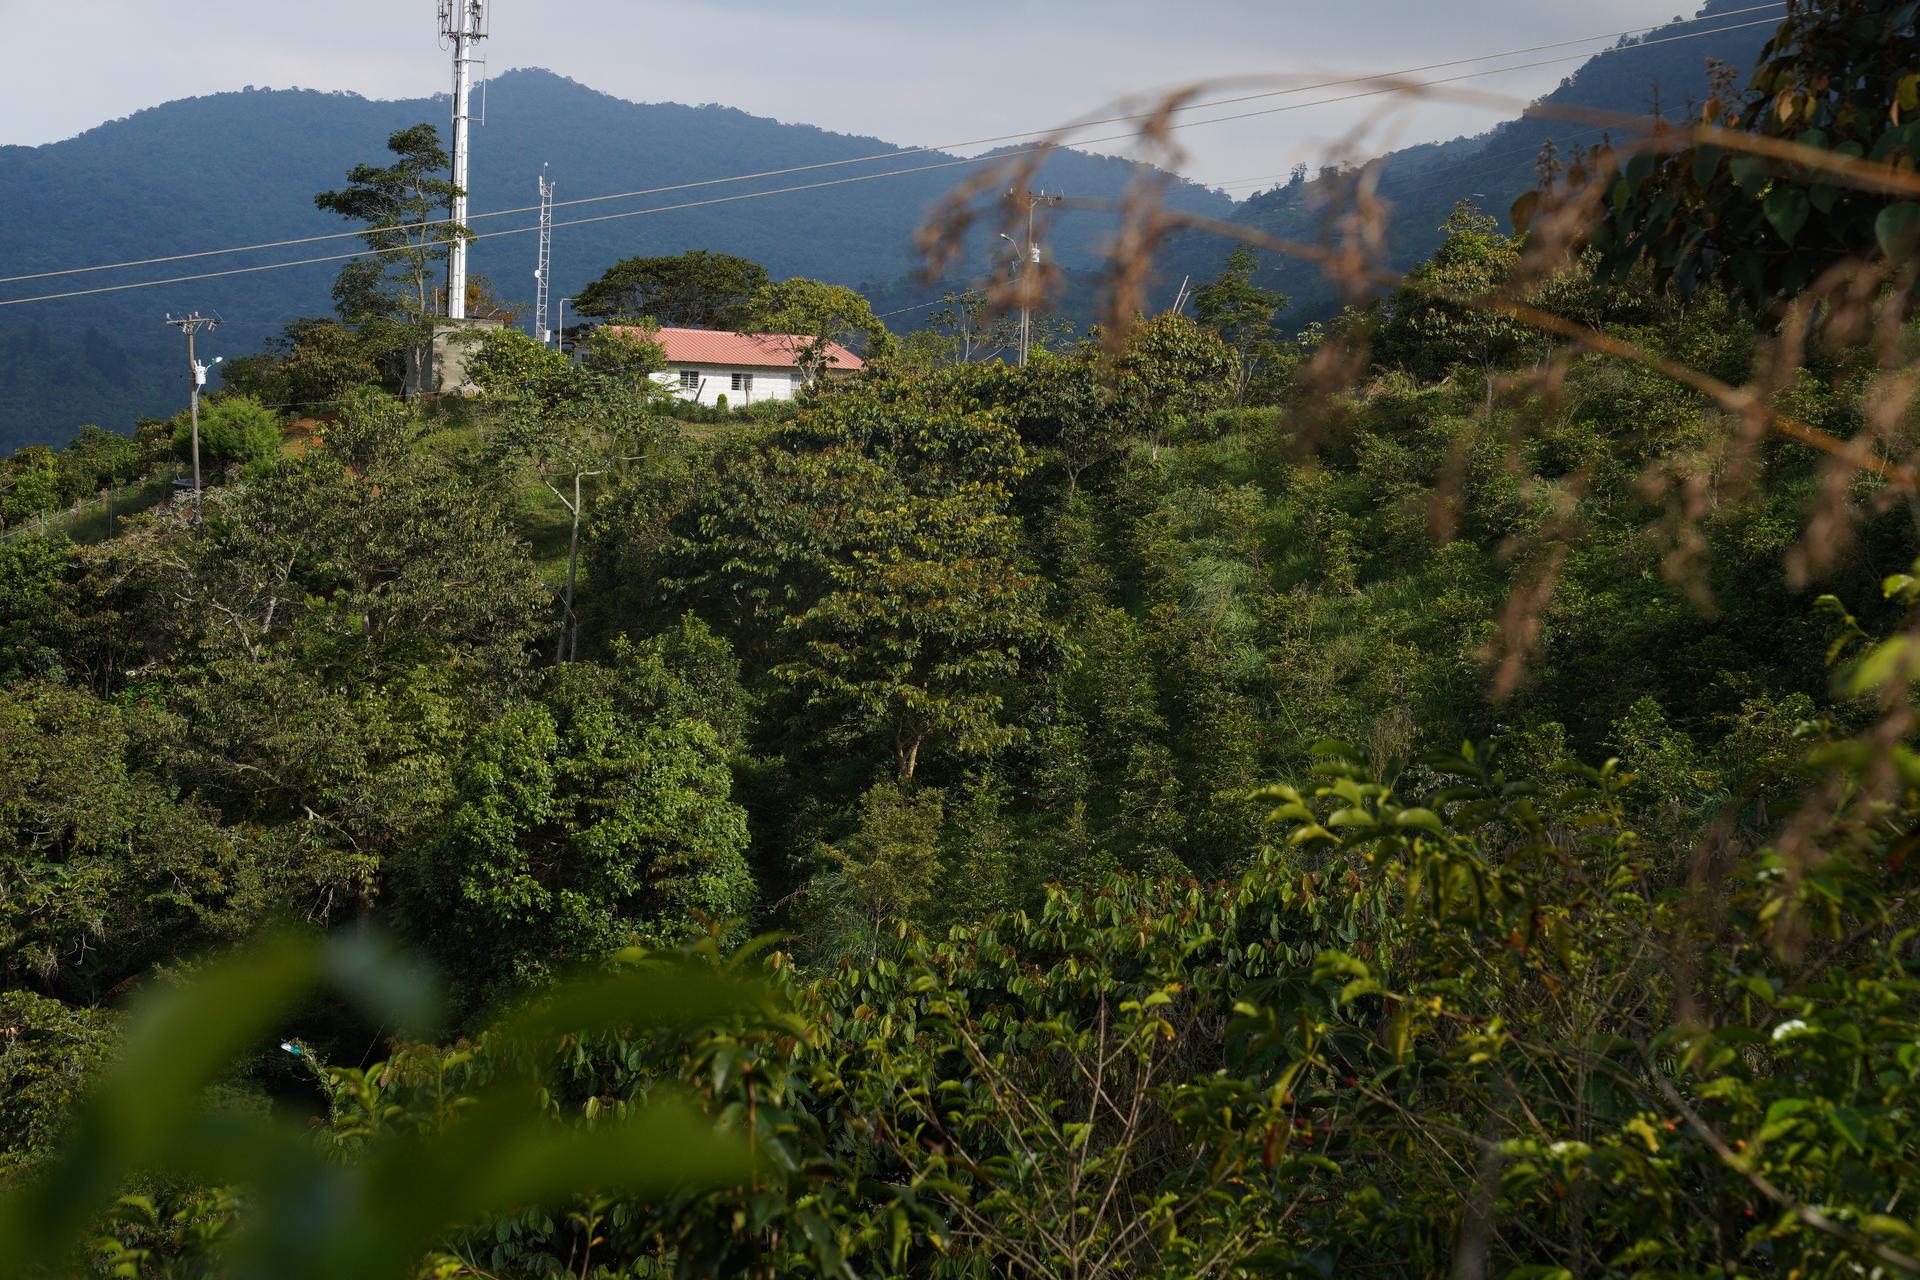 A visit to this farm near Cali, Colombia, inspired Mauricio Zuñiga to become a coffee exporter.